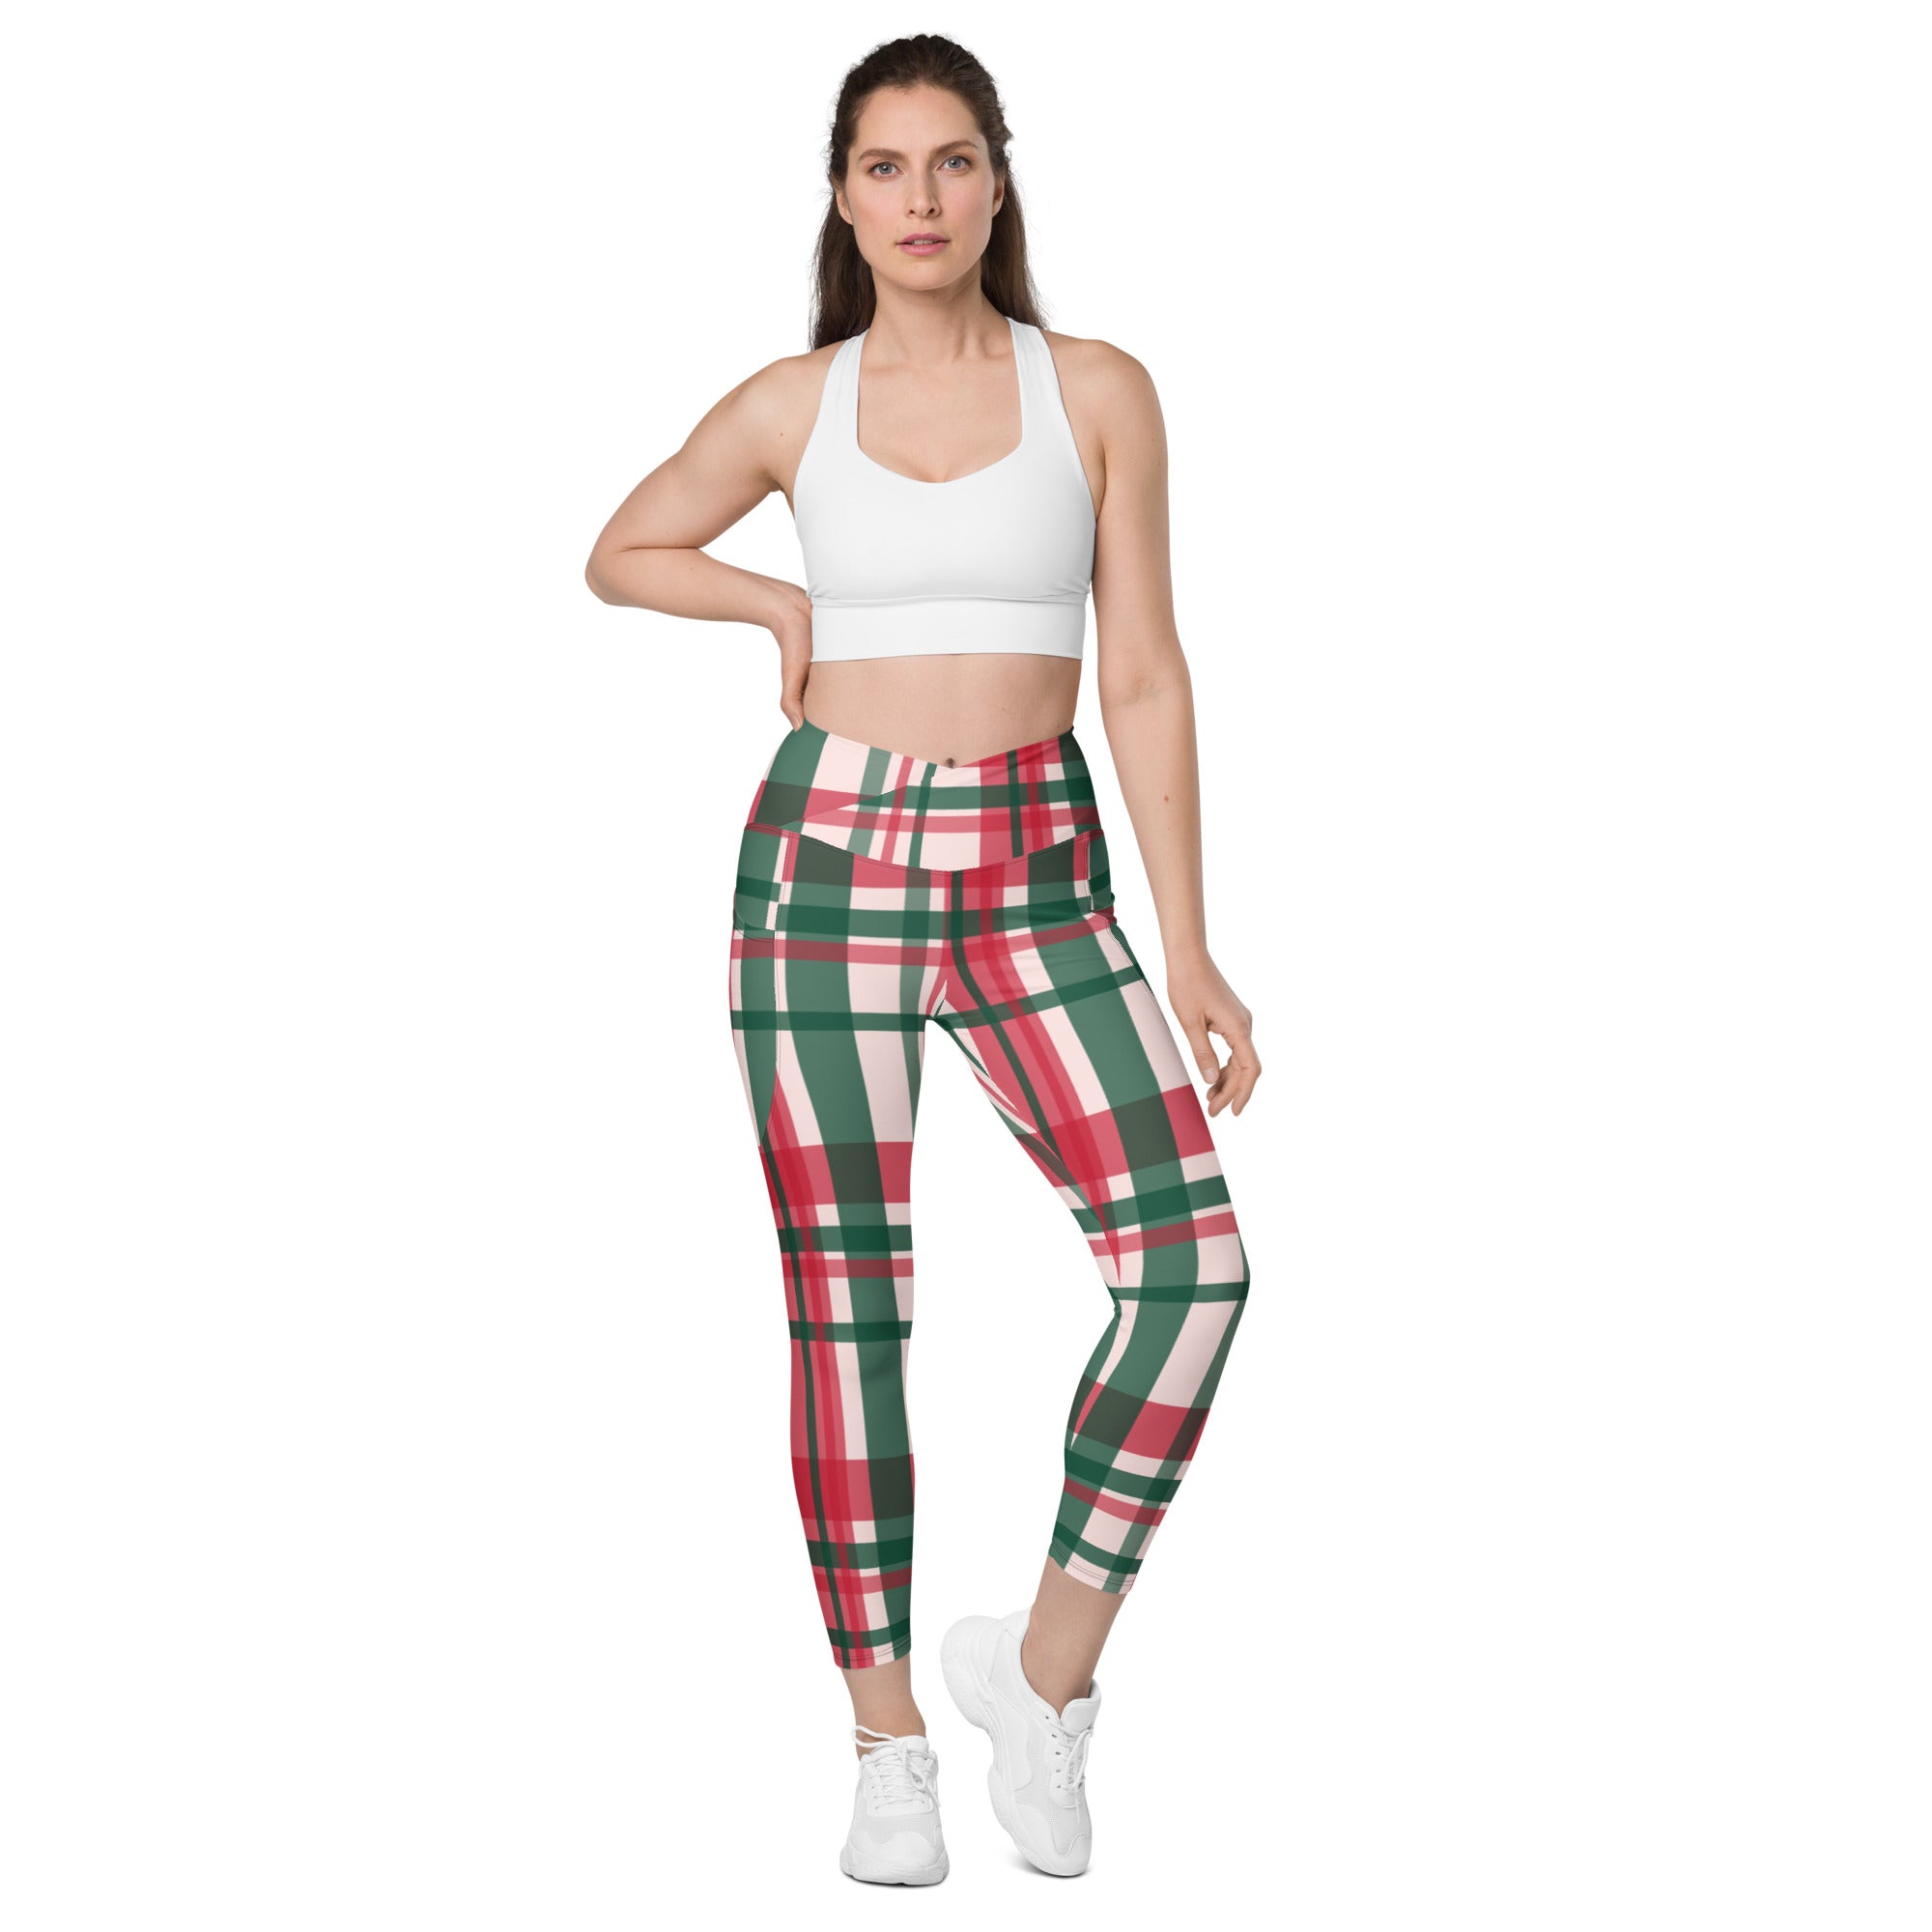 Red Plaid Print Women's Tights, Best Red Green Plaid Print Best Designer Printed Crossover UPF 50+ Sports Yoga Gym Leggings With 2 Side Pockets For Ladies - Made in USA/EU/MX (US Size: 2XS-6XL) Plus Size Available